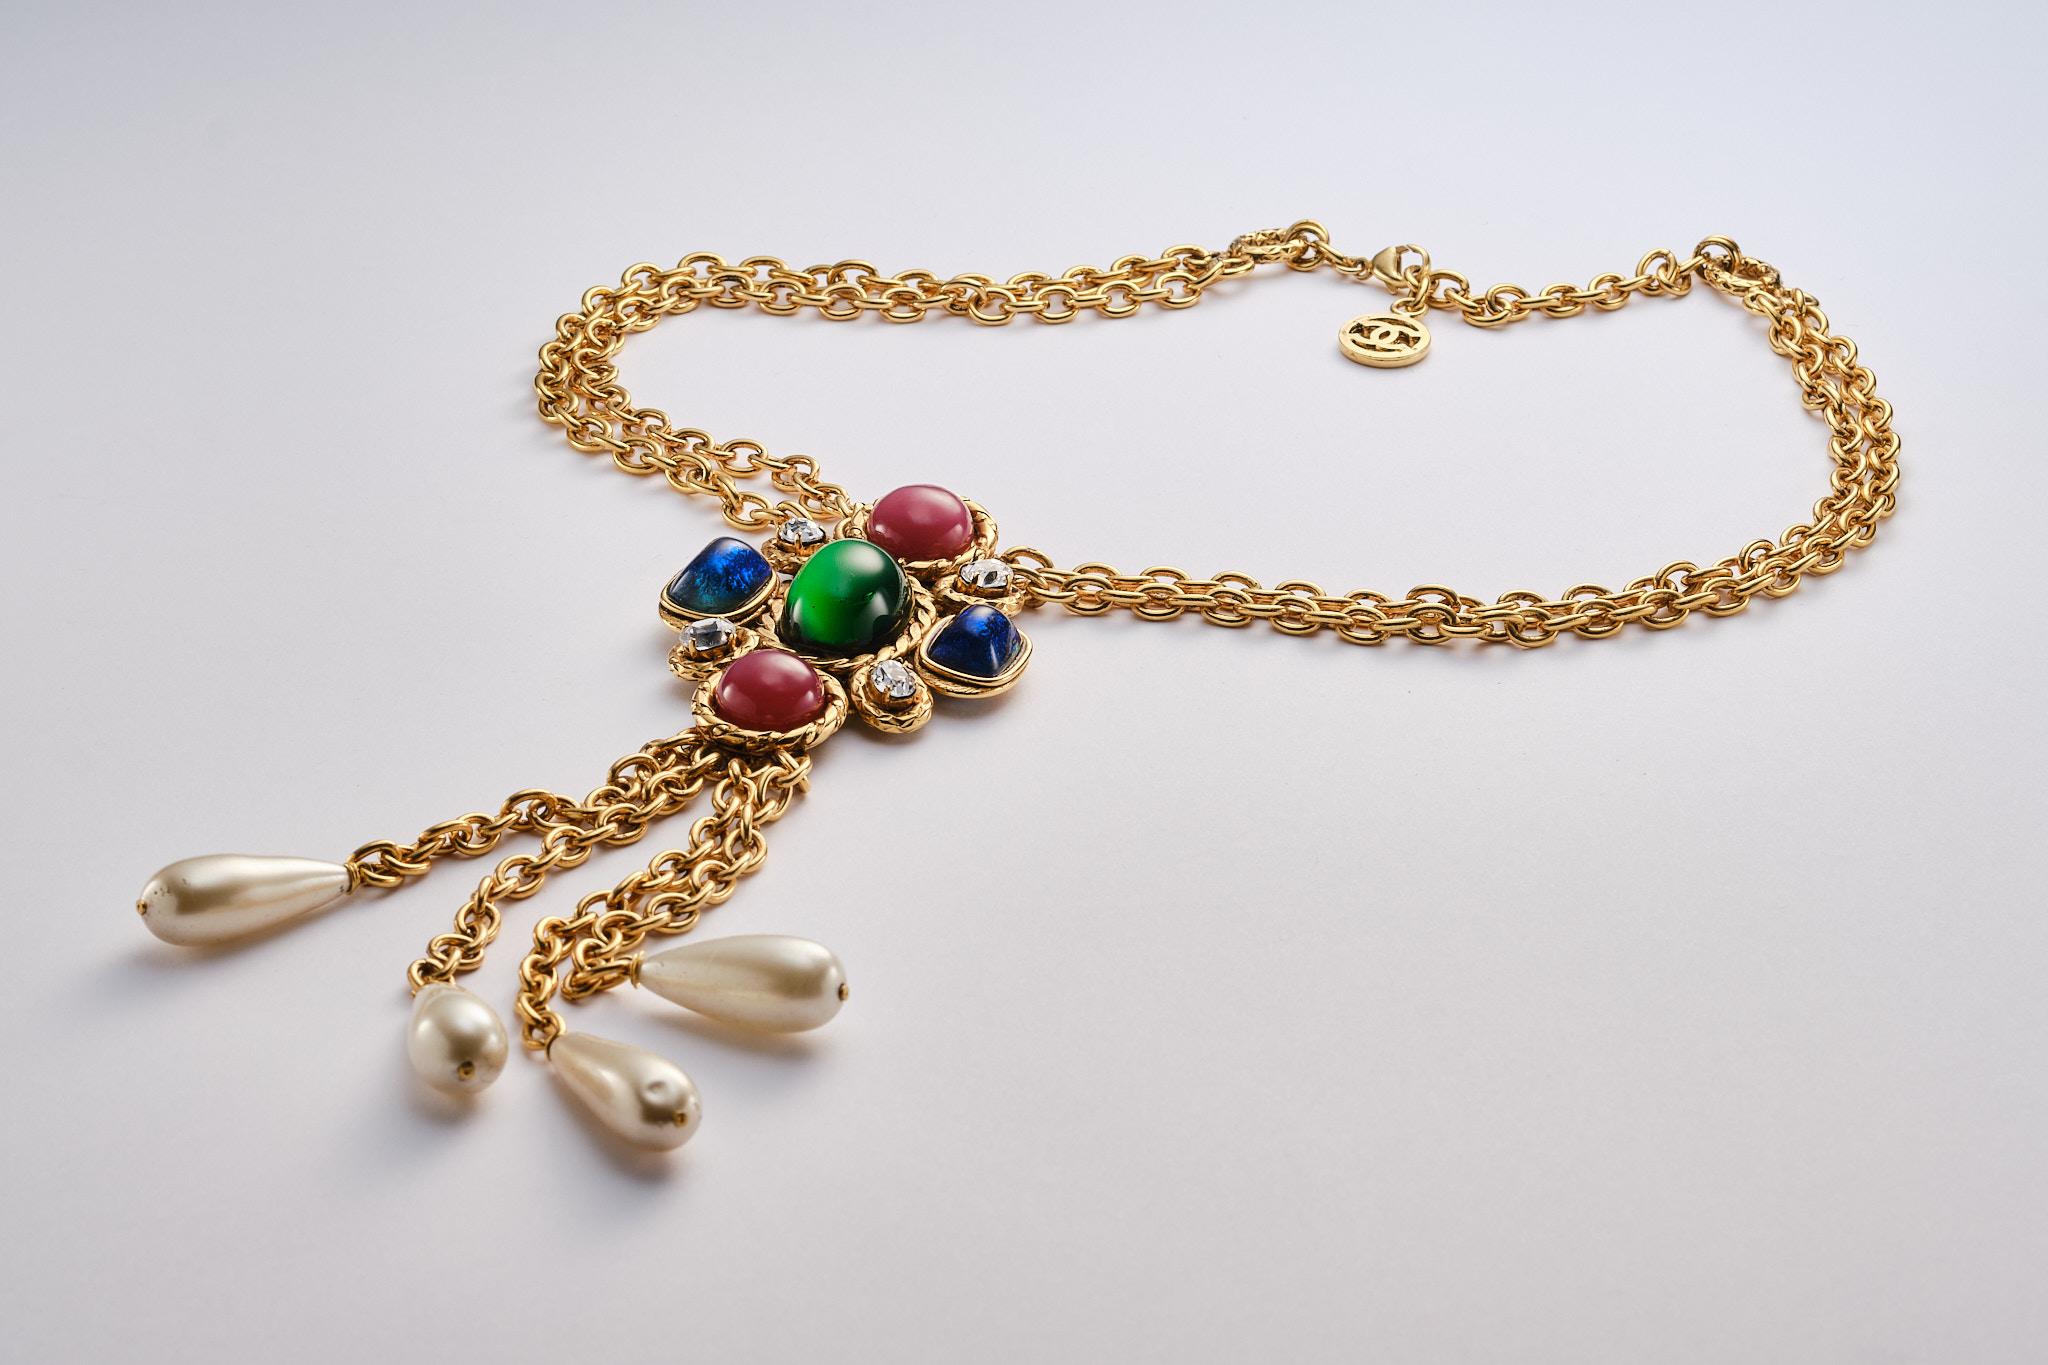 
2 row chain with a large cross-shaped pendant, decorated with pink , blue and green glass cabochons and rhinestones. On it hang 4 chains 8 cm long with beautiful pearl drops.
The chain is designed by Victoire de Castellane, the metalwork by